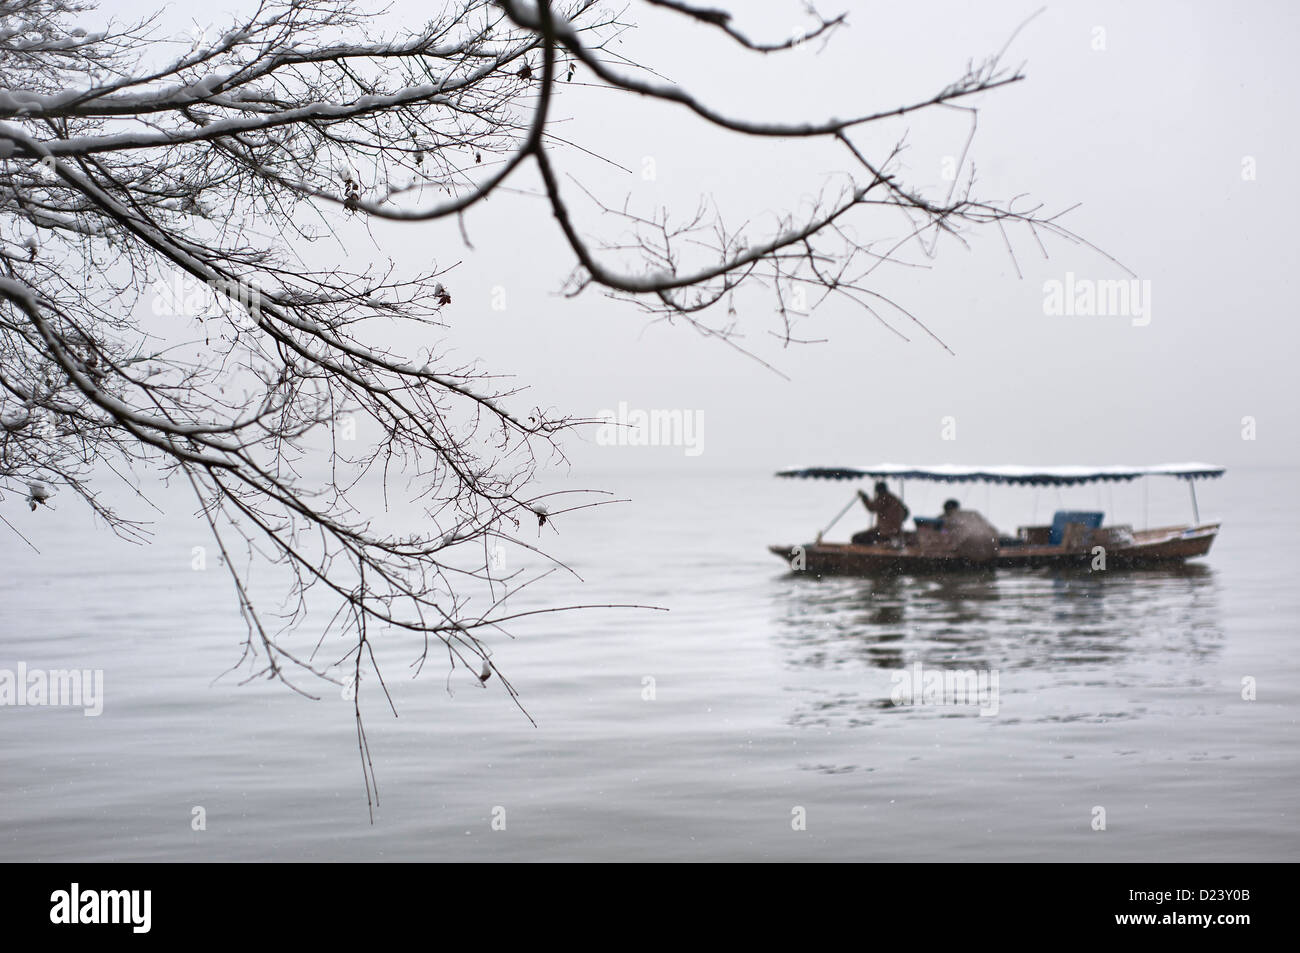 Rowing boat and branch at West Lake in winter, Hangzhou Stock Photo